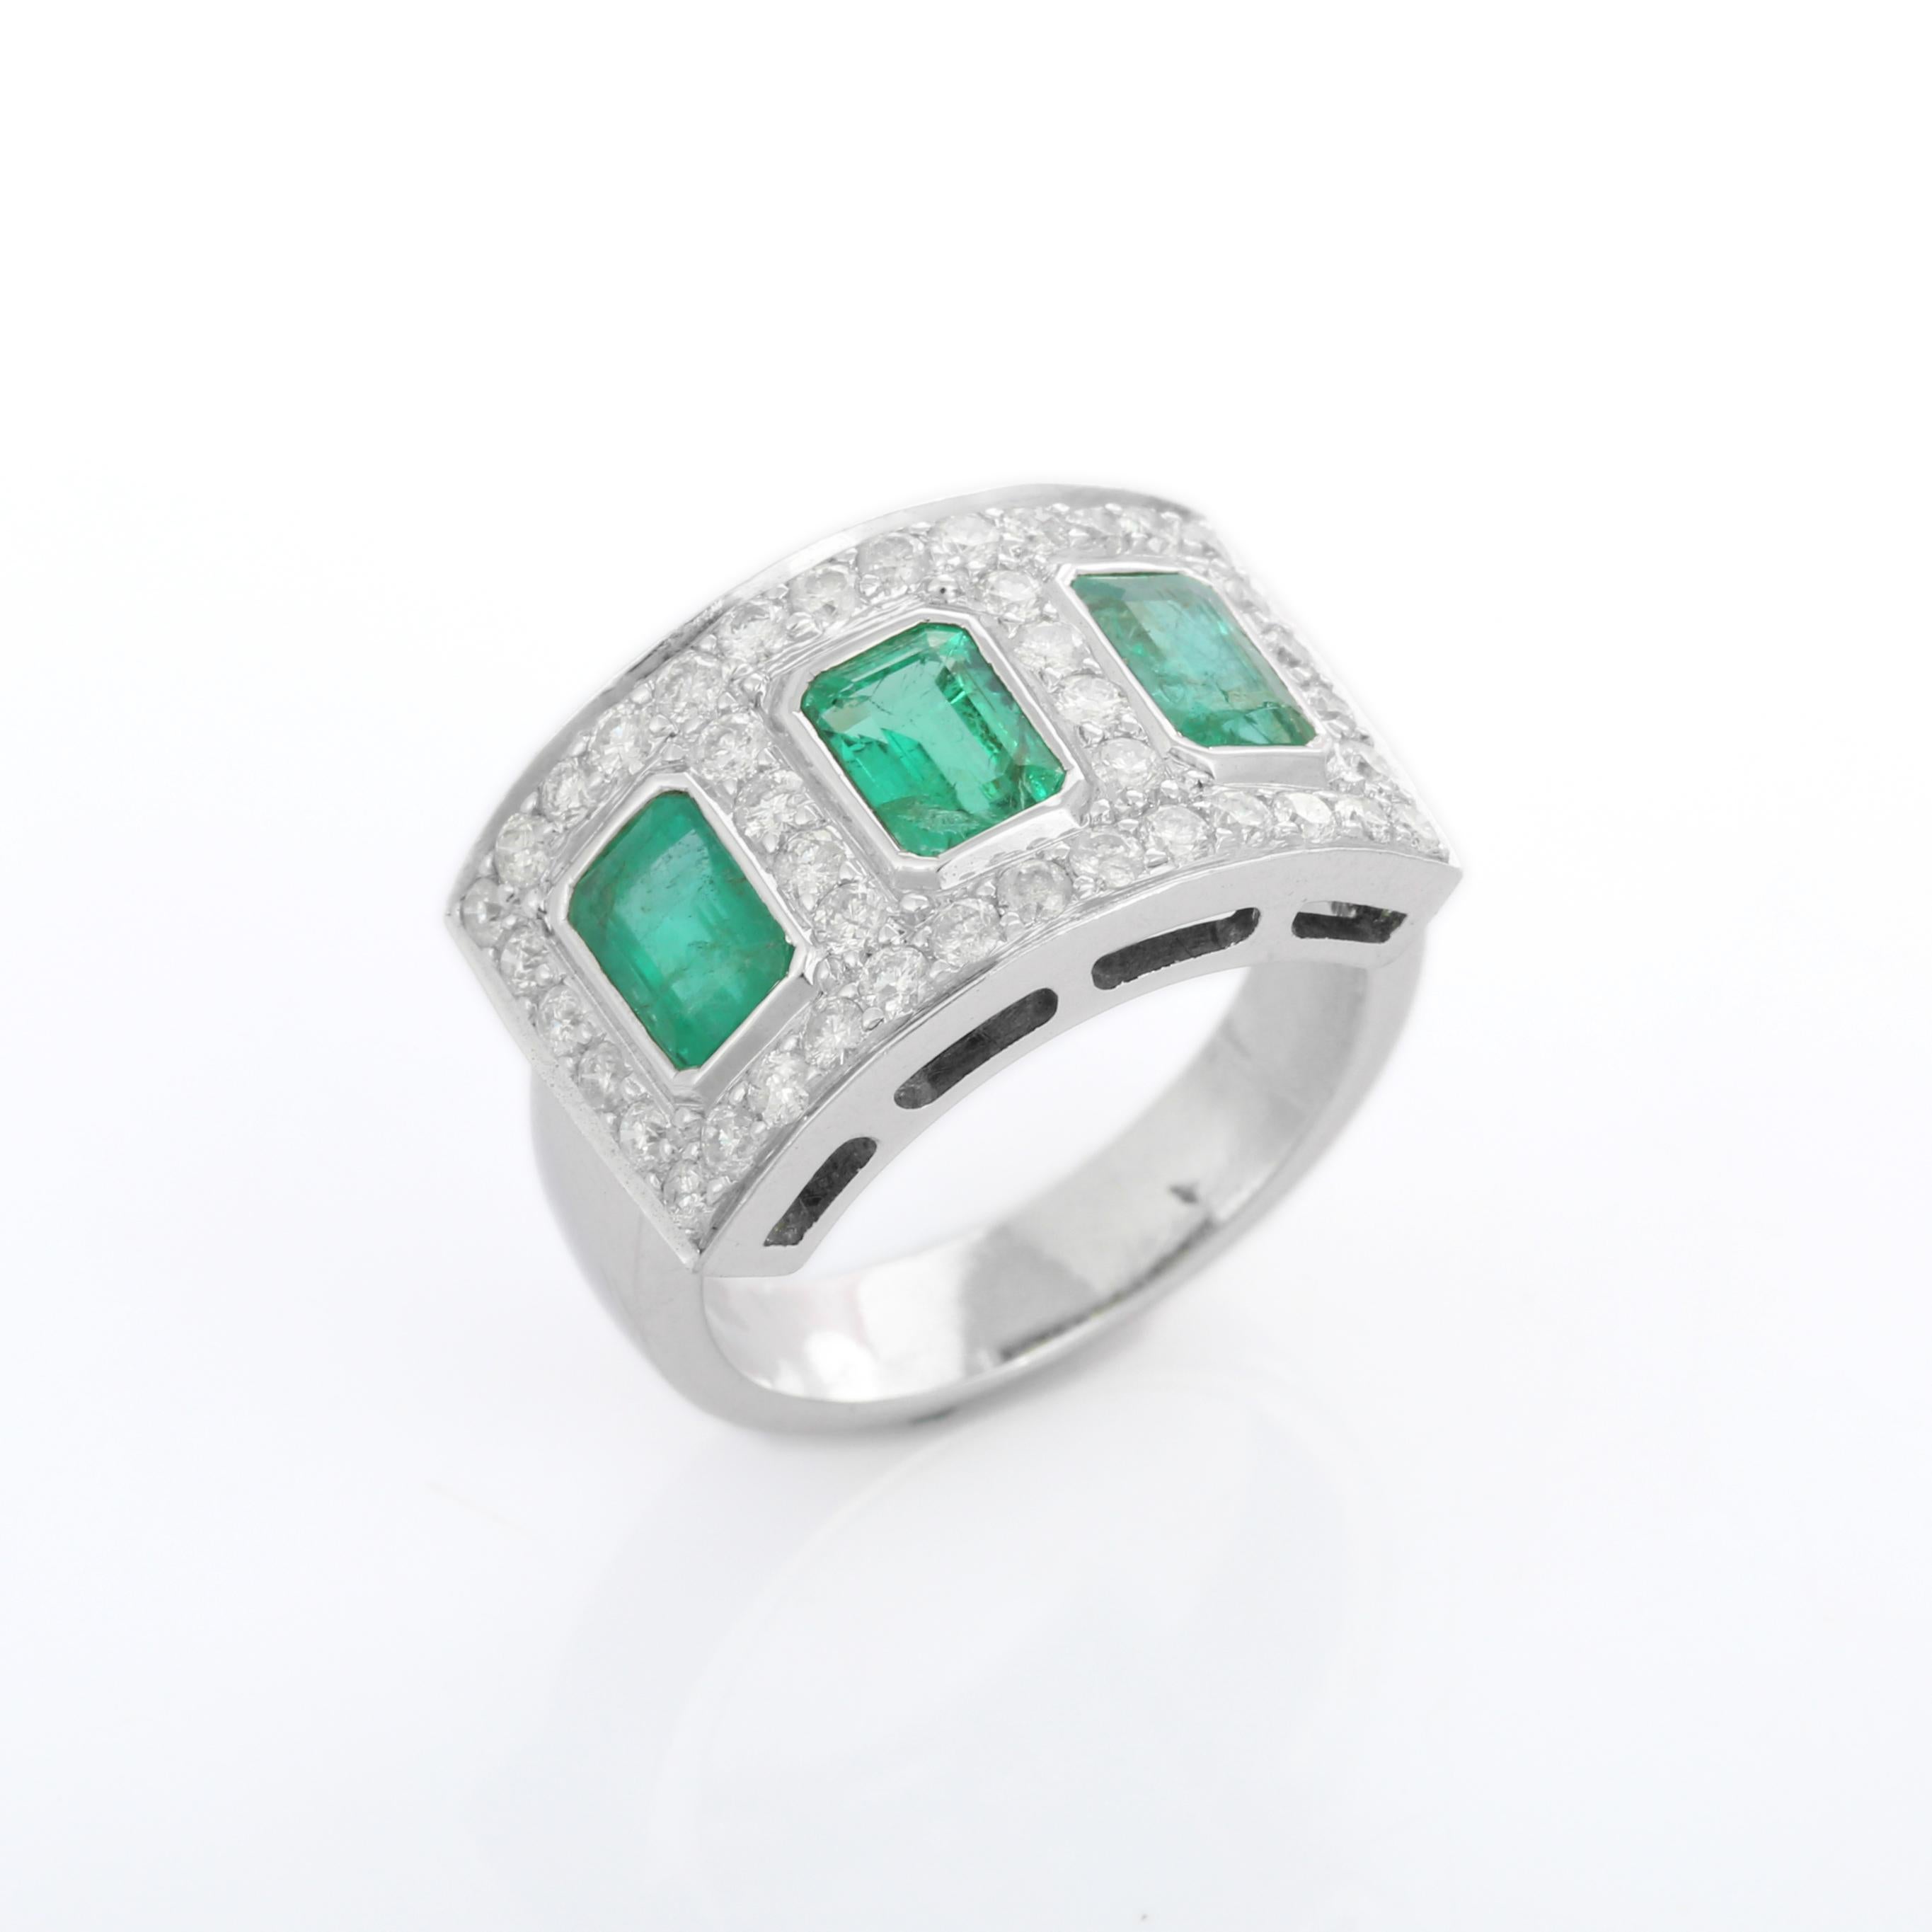 For Sale:  Three Stone Emerald Ring With Diamond in 18K White Gold 6